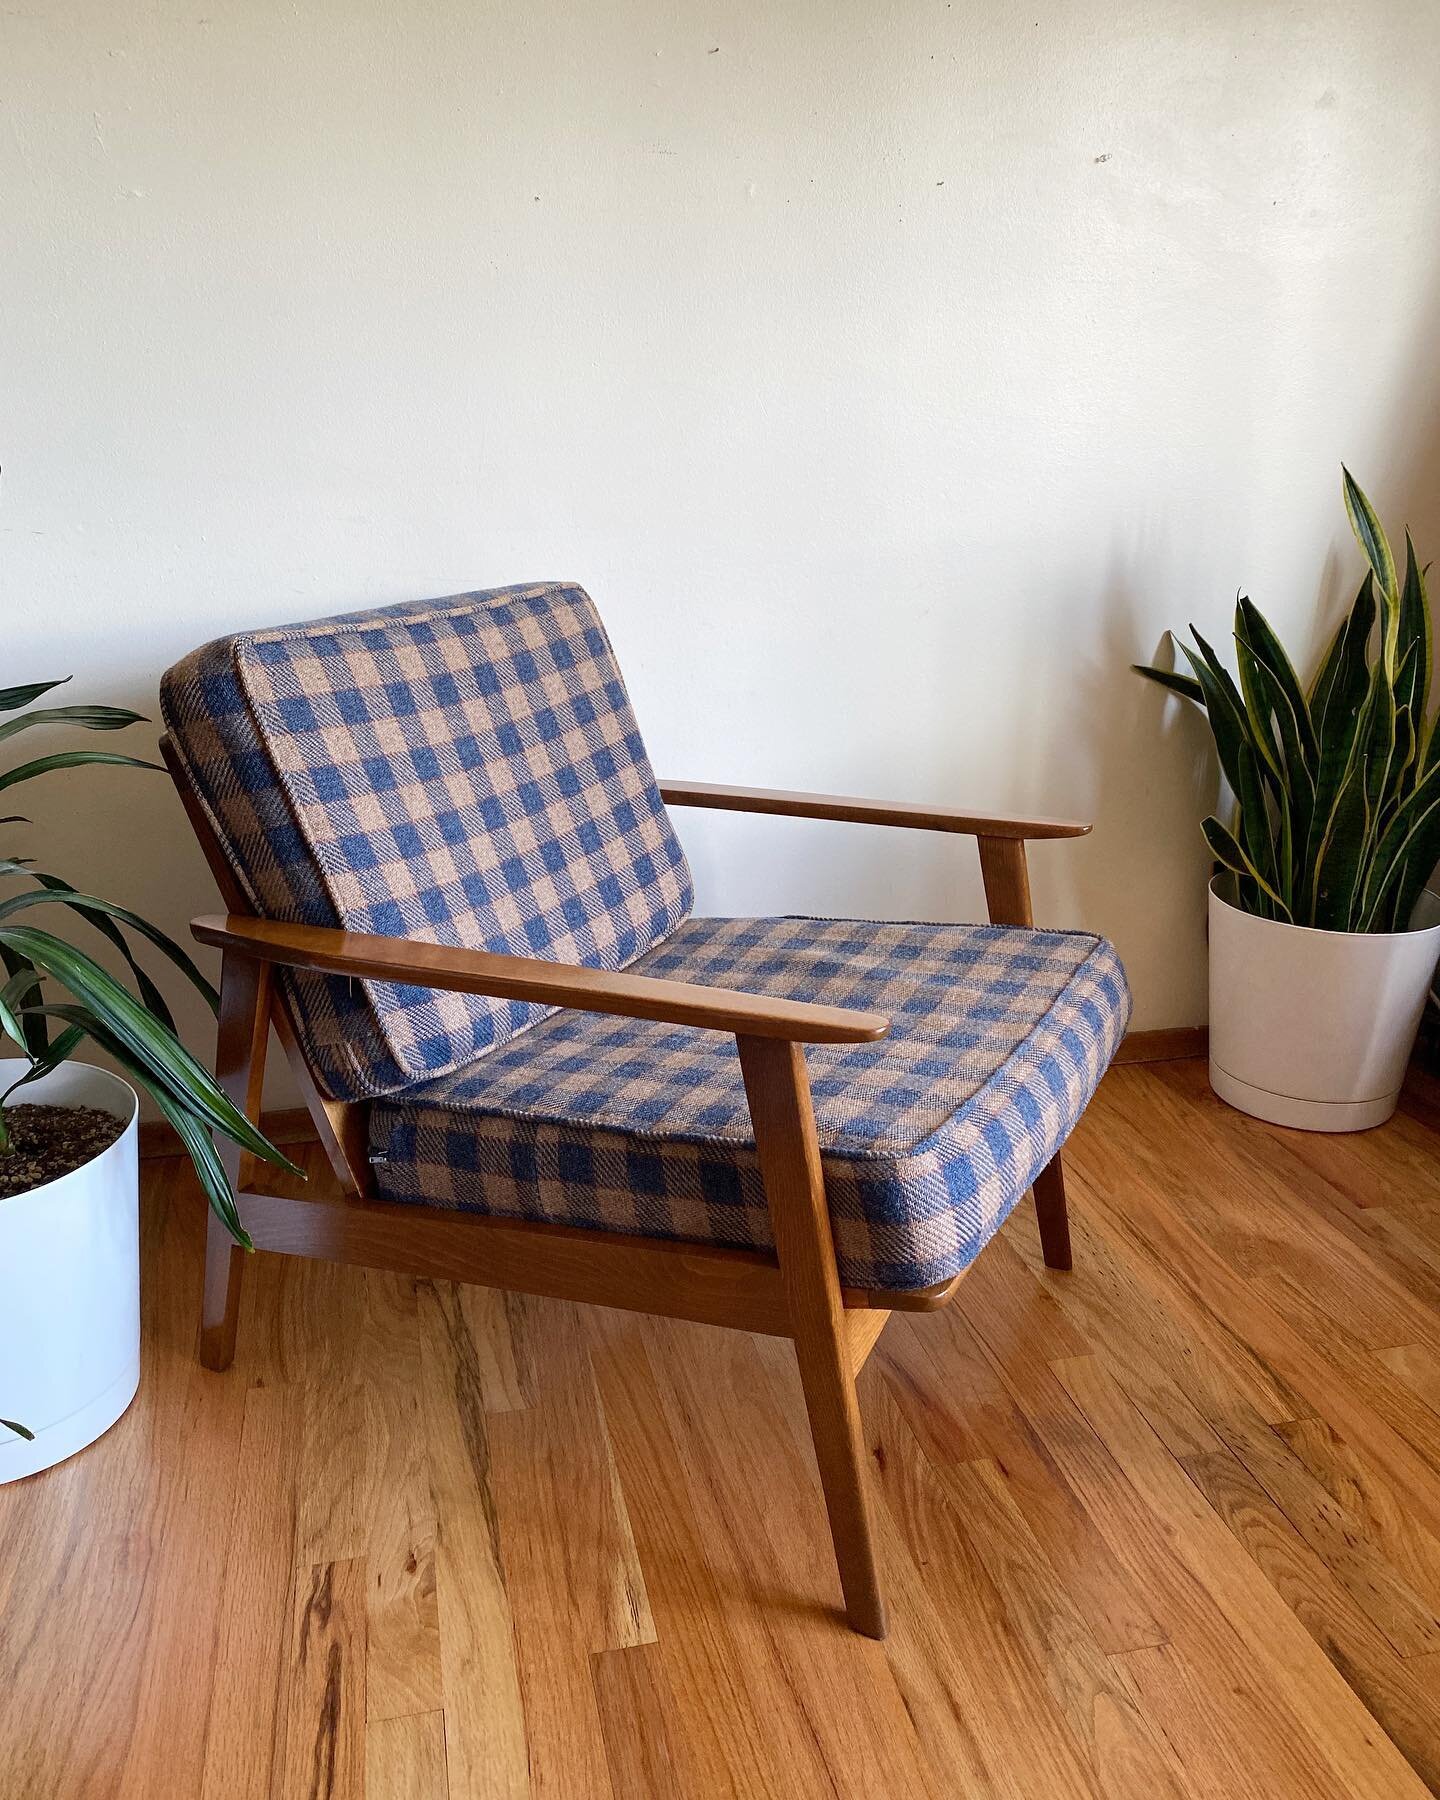 You guys surprised me when you voted in our Stories to keep this original plaid upholstery! I was not expecting that at all, but I can totally see how rad it is - like your favorite flannel shirt in chair form. 🧸

Matt completely refinished this cha